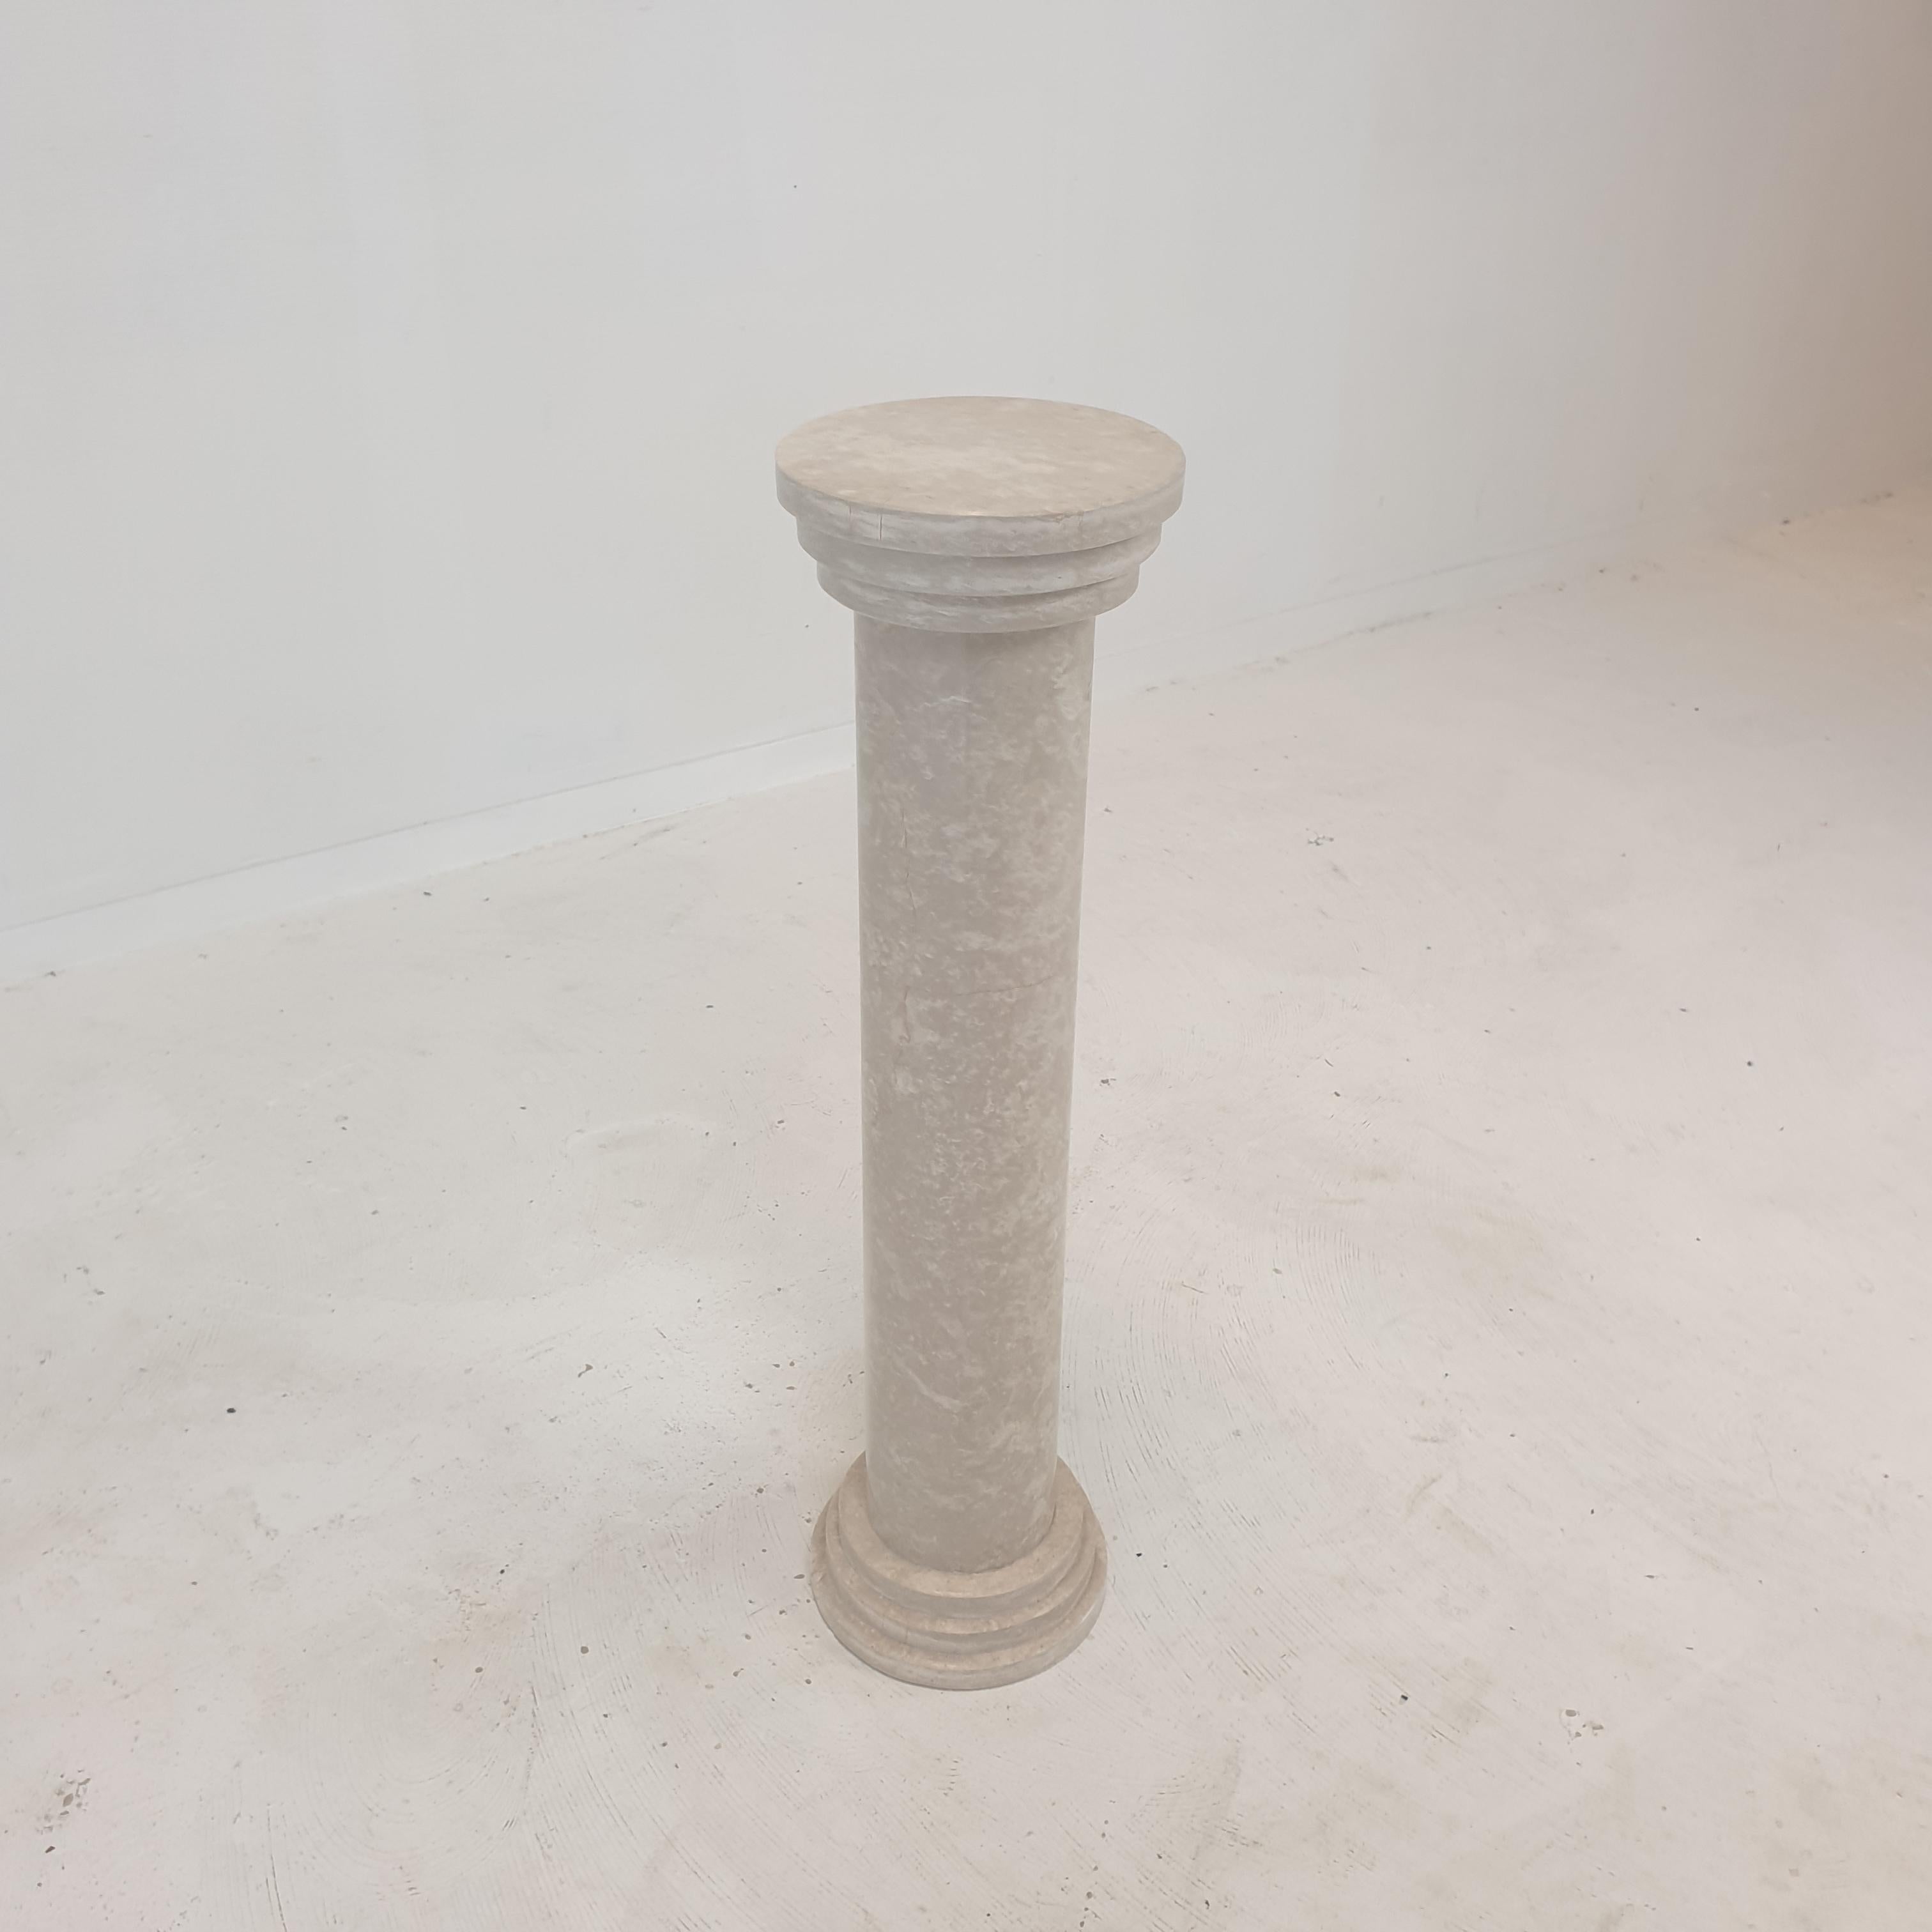 Italian Travertine Side Table or Pedestal, 1980s For Sale 1